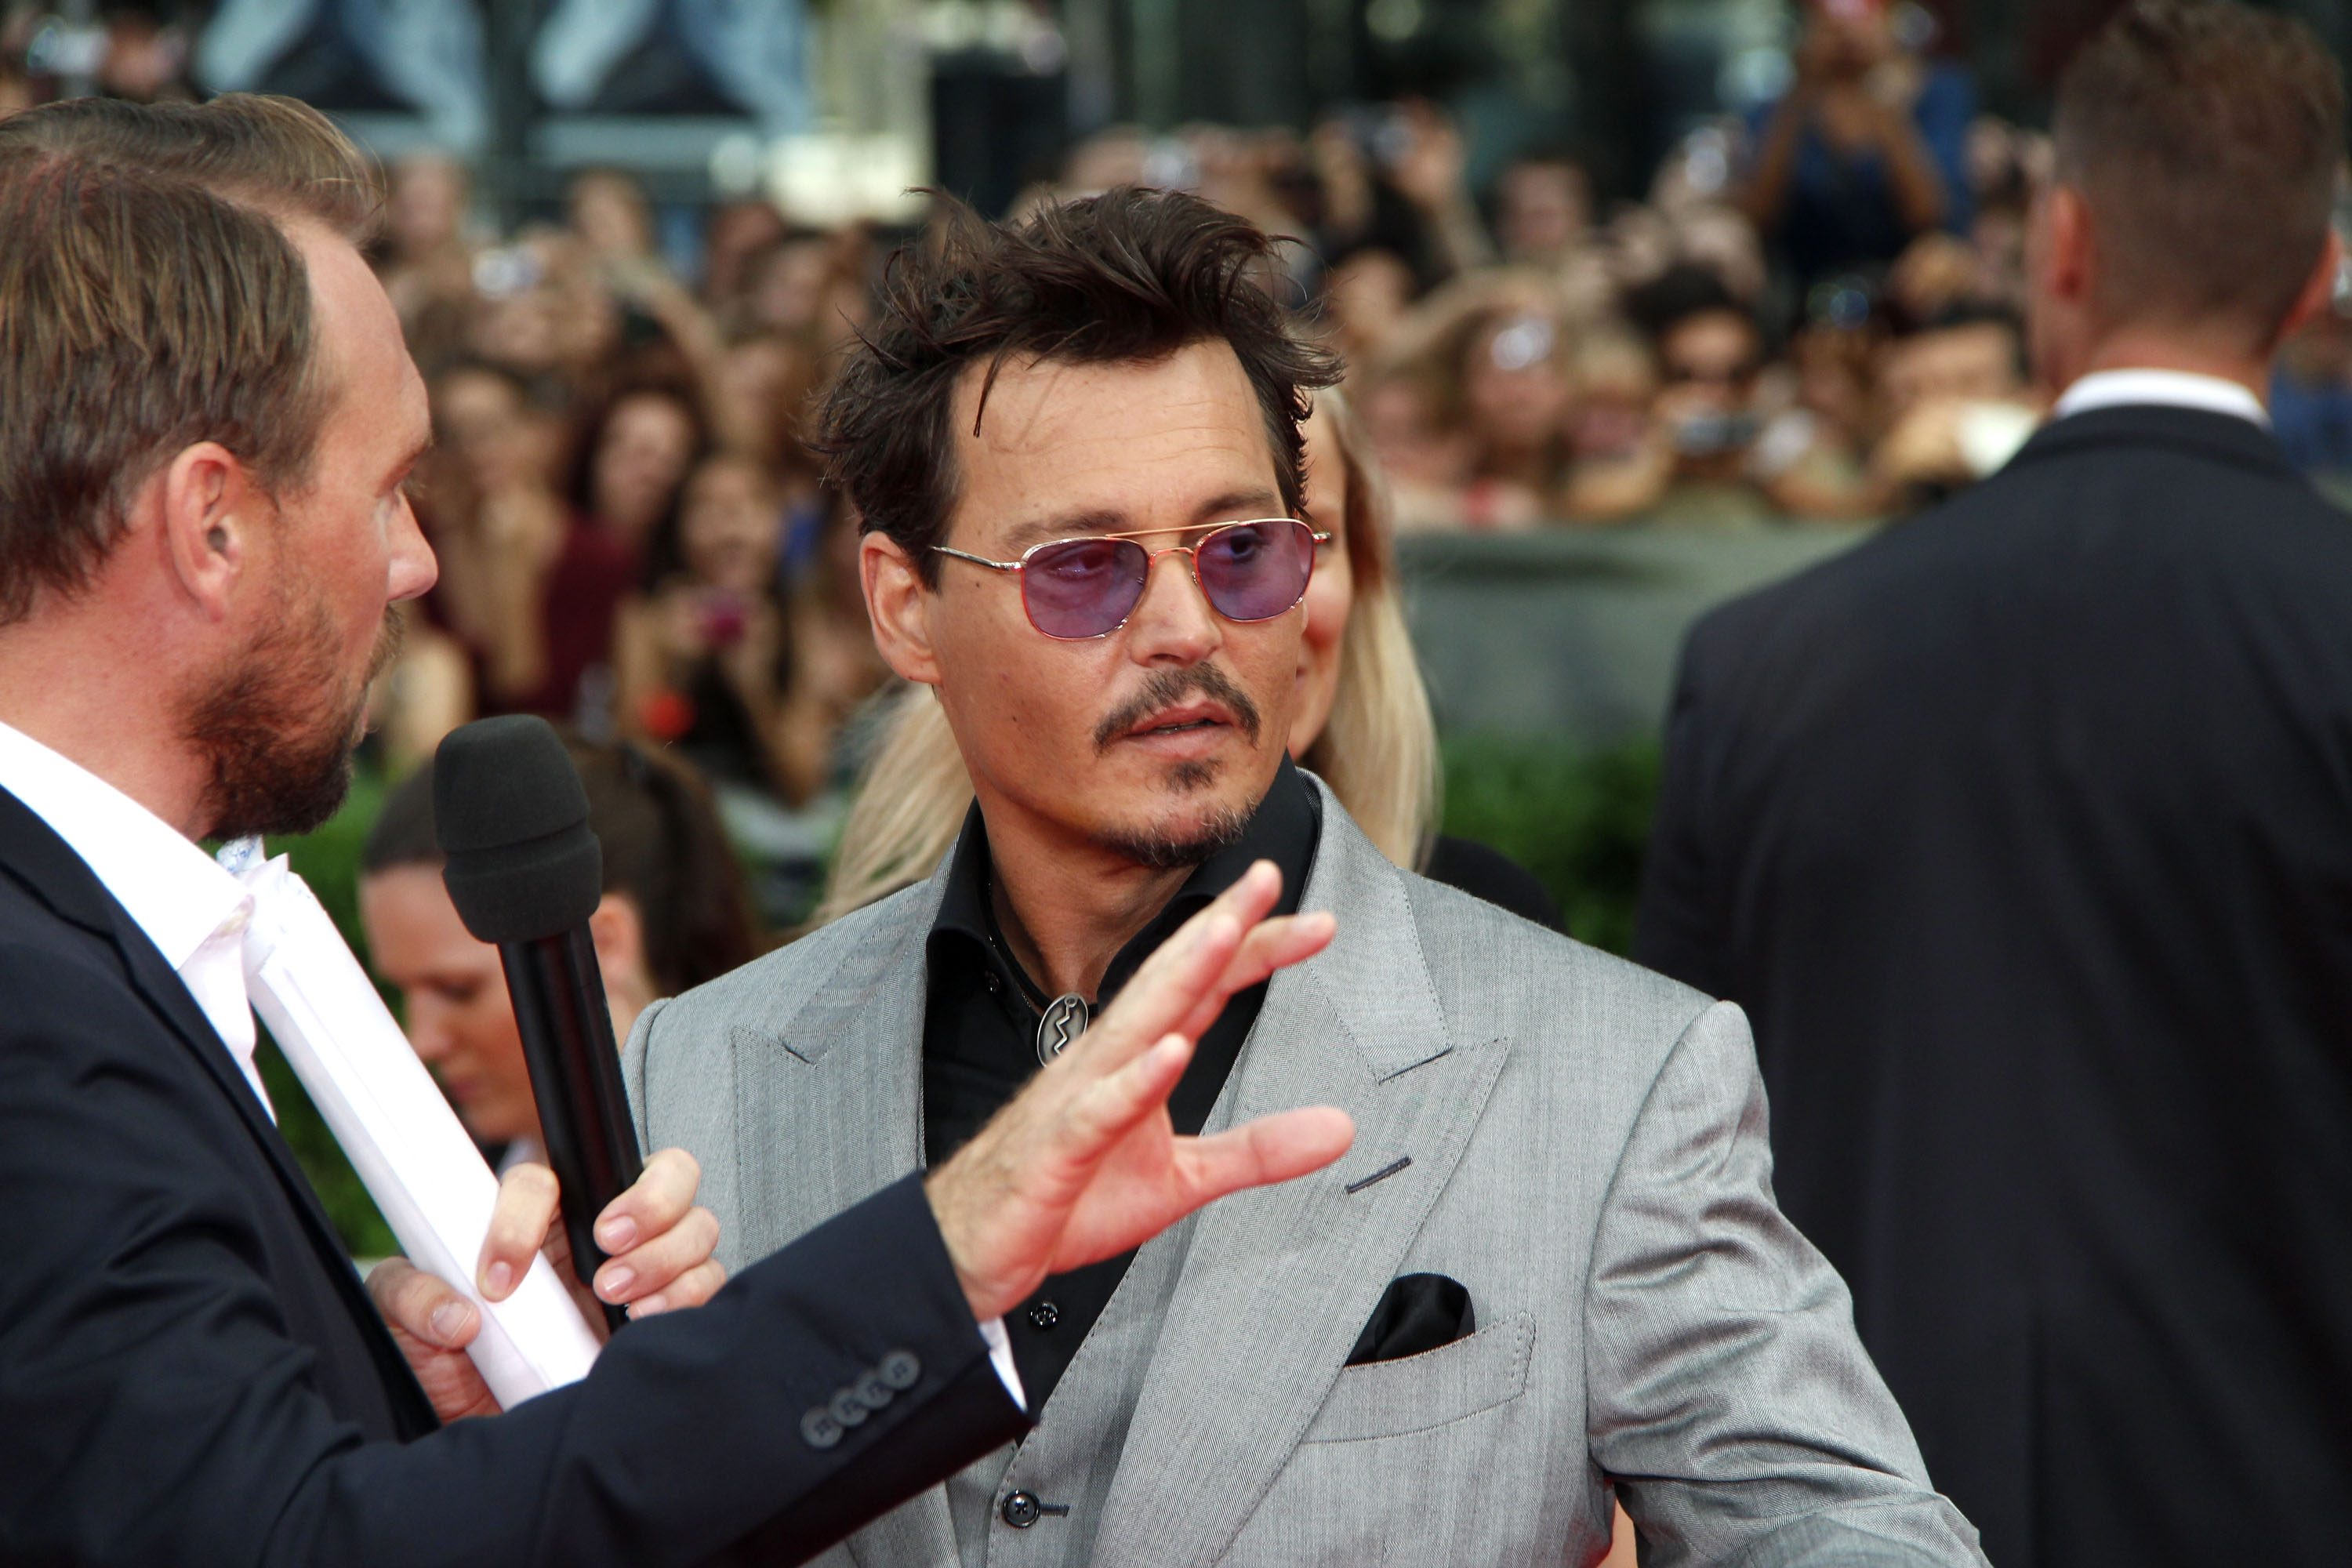 Johnny Depp interviewed at the "Lone Ranger" Germany premiere on July 19, 2013, in Berlin, Germany | Source: Getty Images